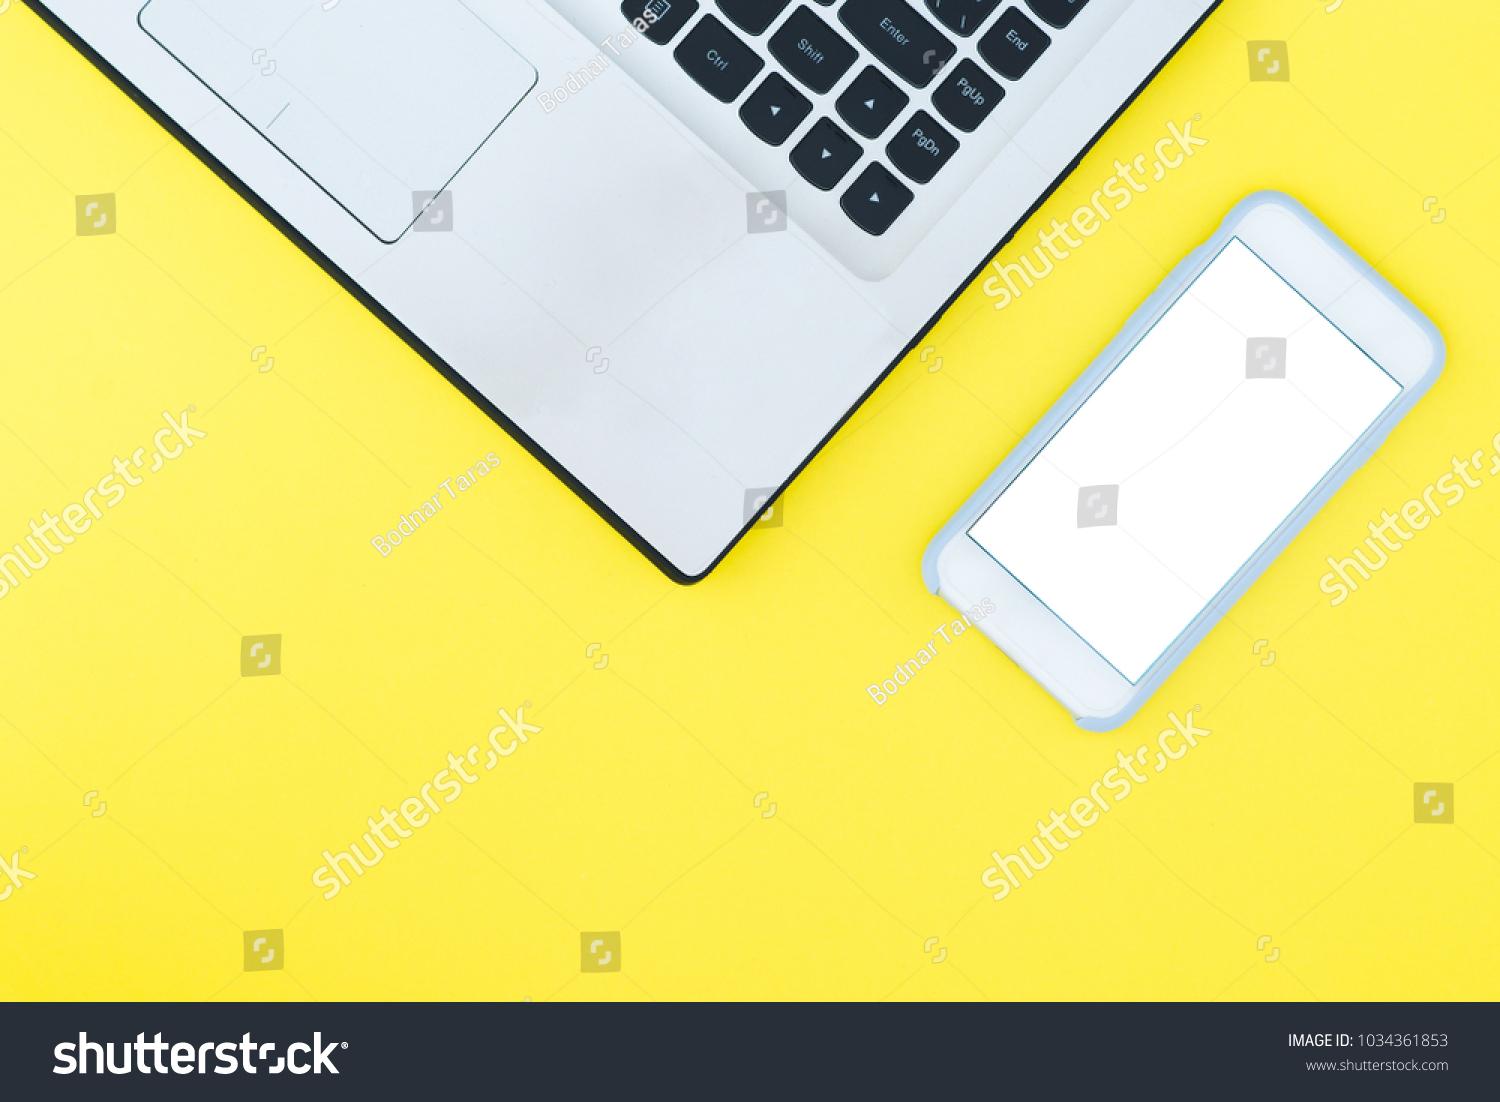 A laptop and a smartphone with a white screen on a yellow background. Minimalistic working space with a place for text. Flat Layout Layout. #1034361853